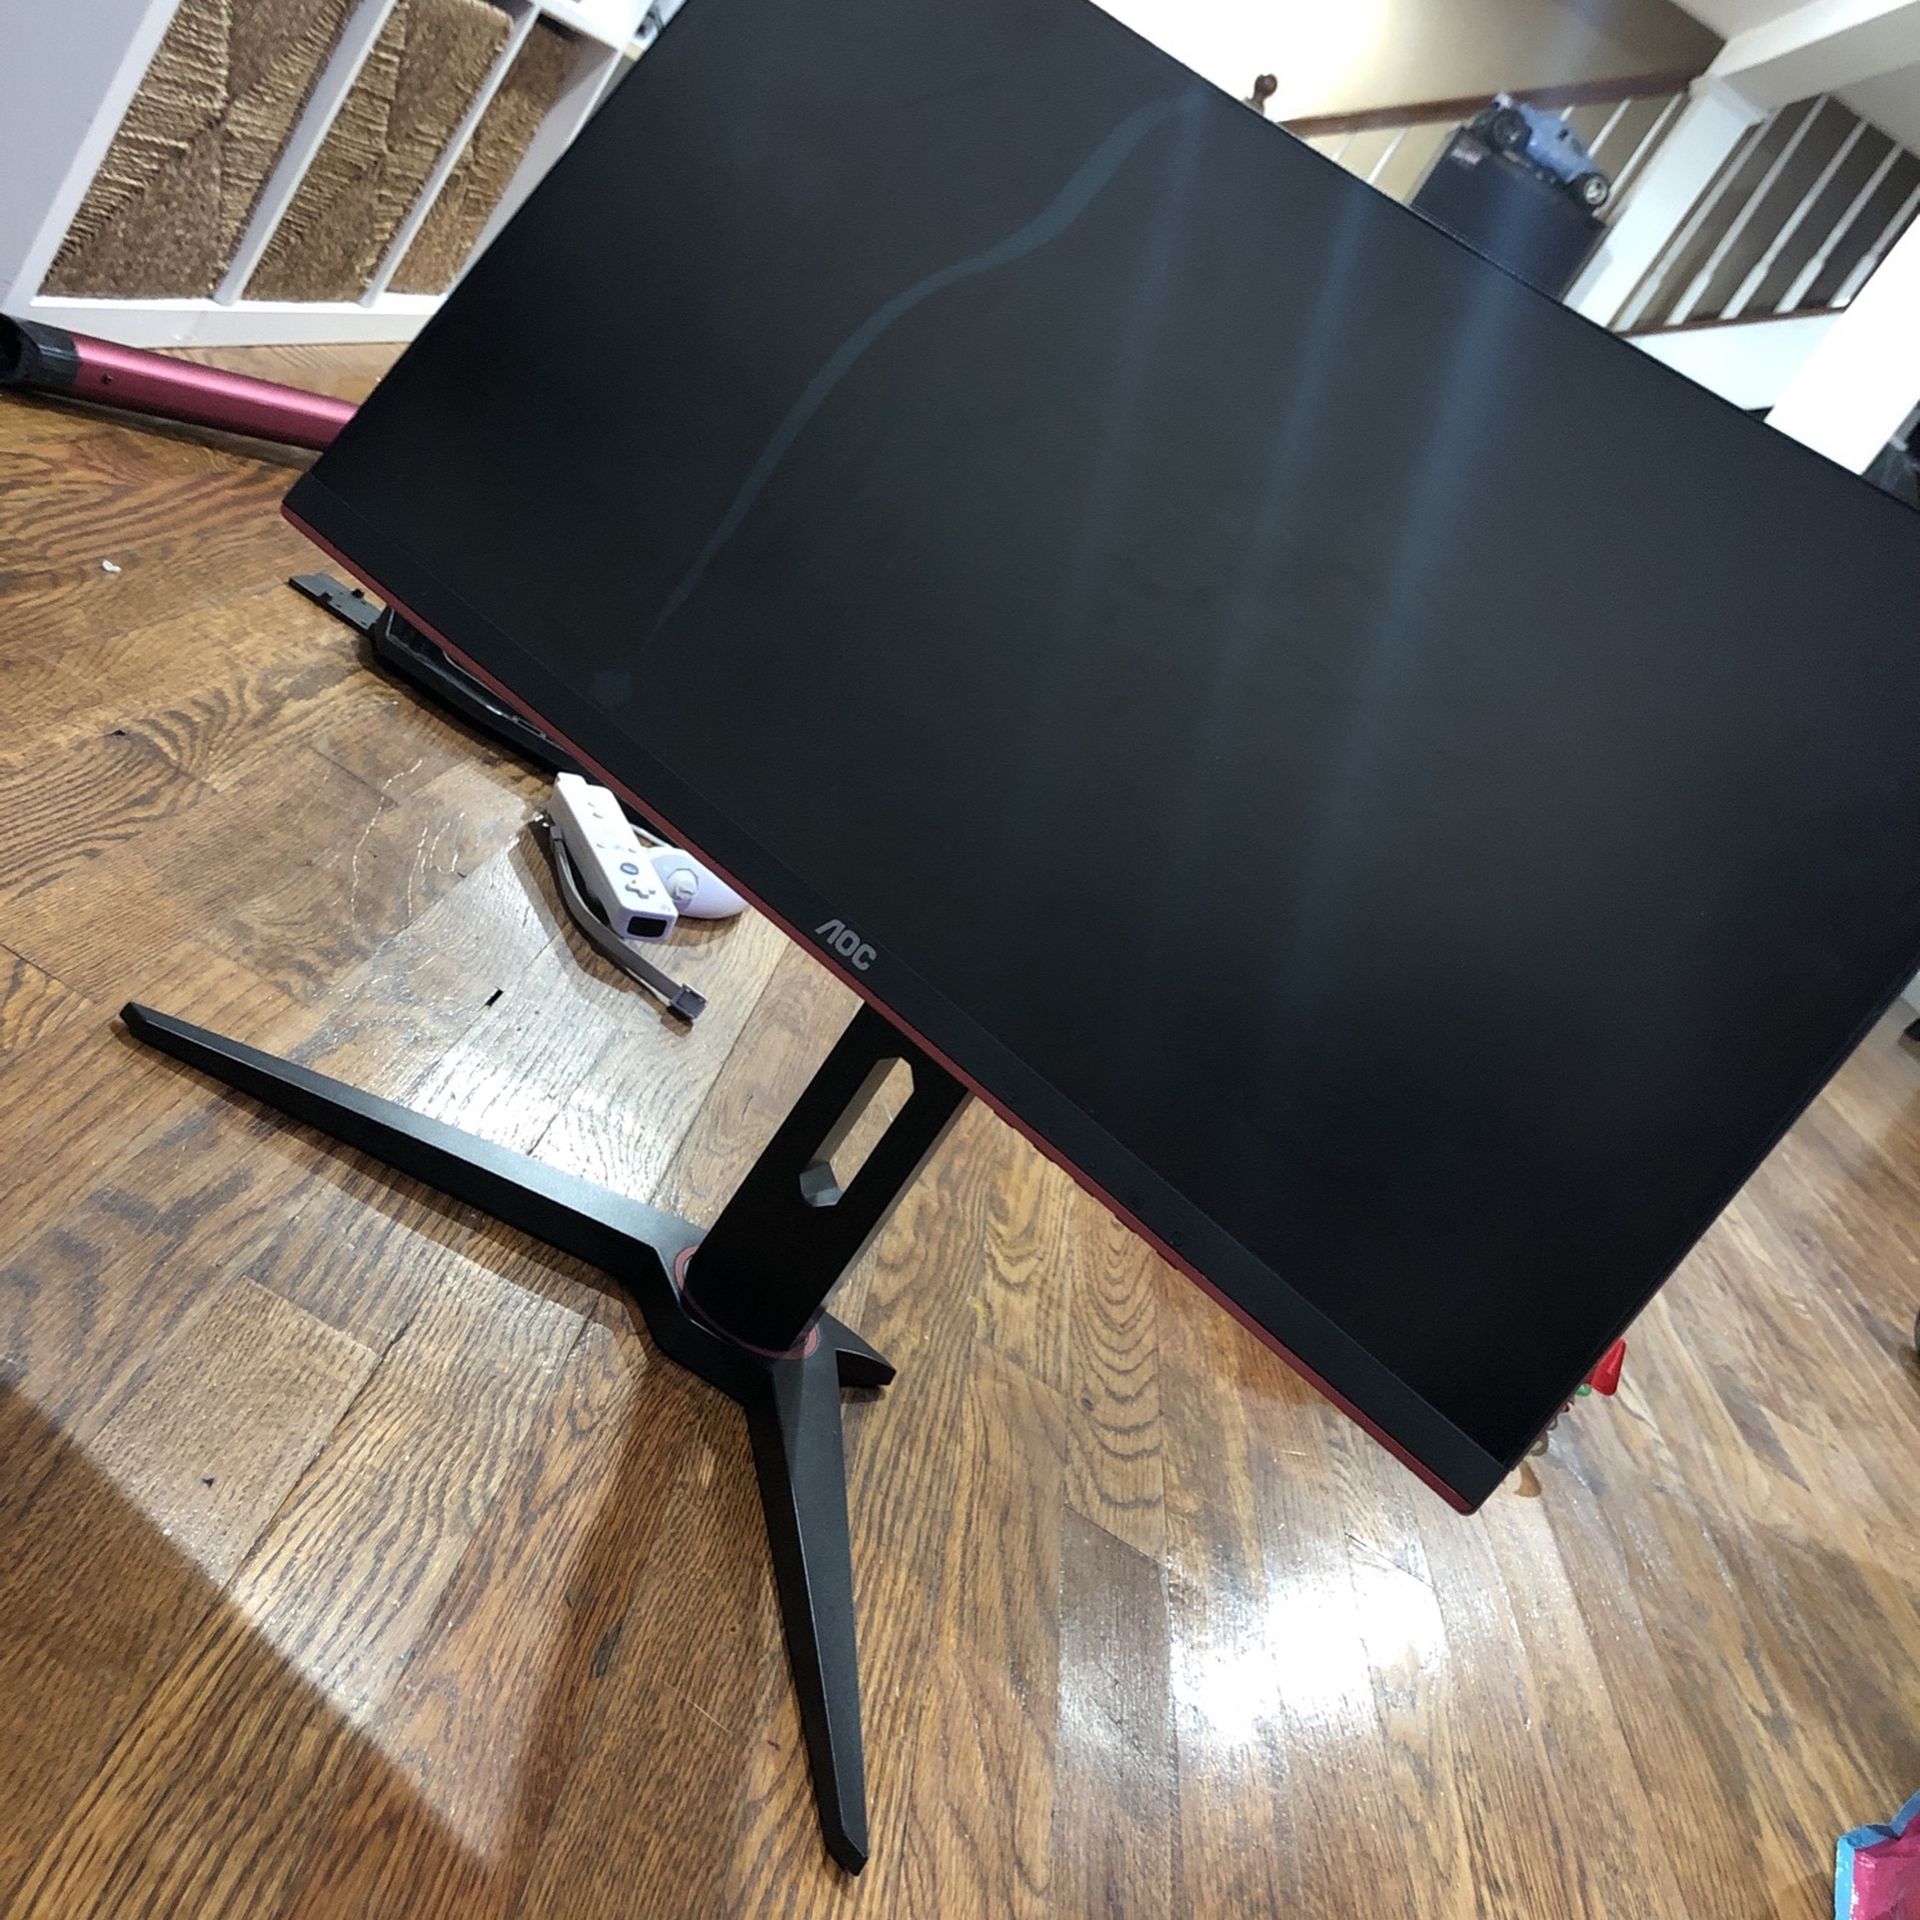 AOC 144hz Monitor(for Parts)